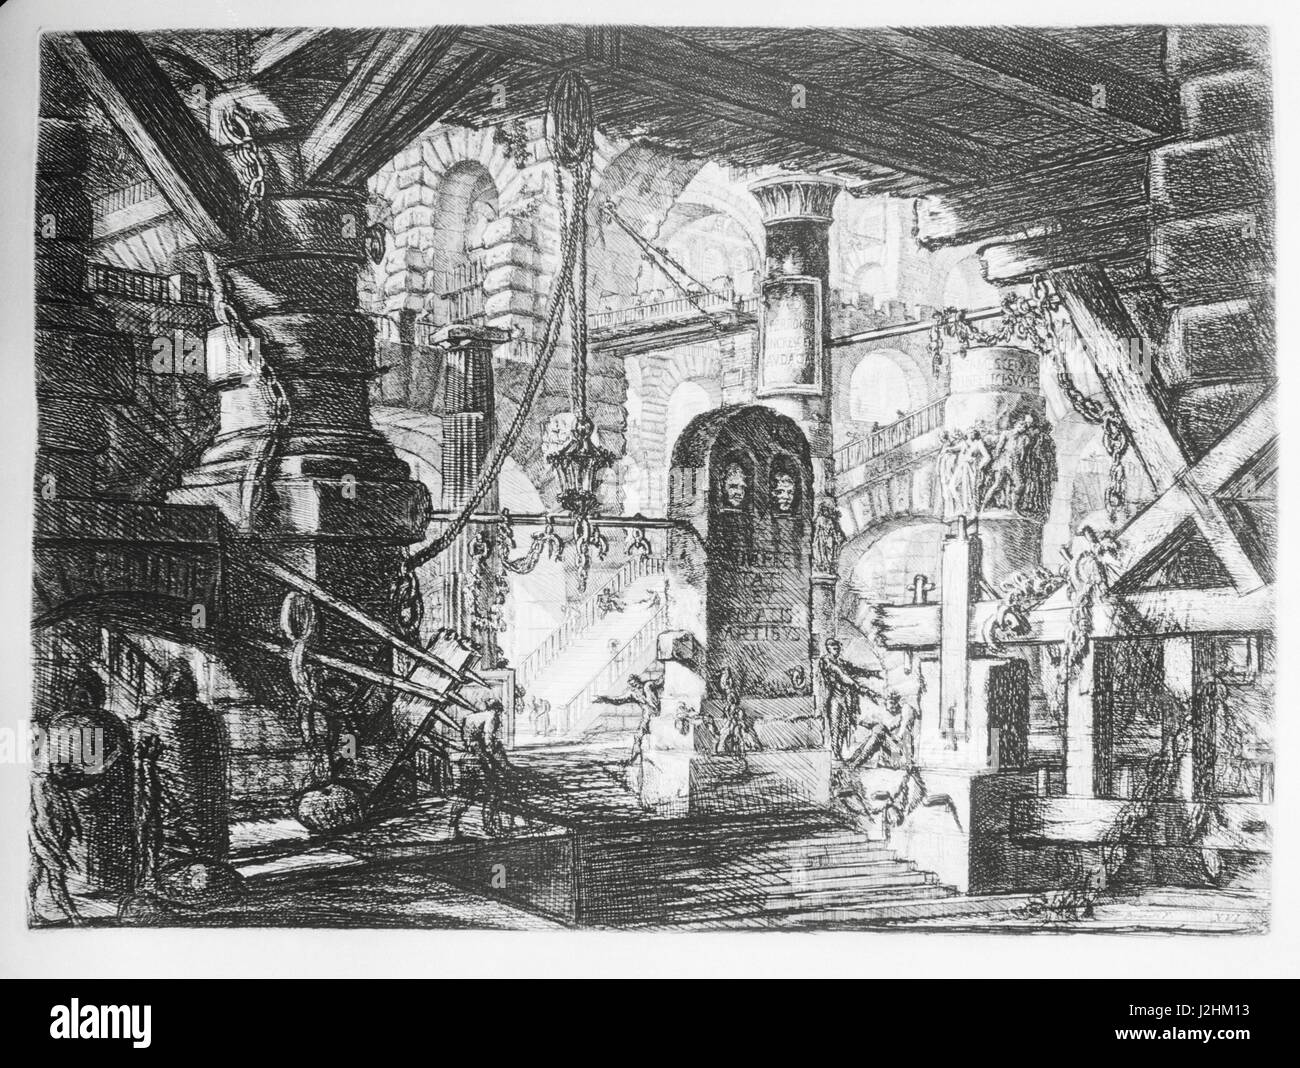 The Imaginary Prisons (Carceri d'invenzione), second version of the series of engravings by Giovanni Battista Piranesi, published in 1761.  Plate XVI: The Pier with Chains  Private collection Stock Photo